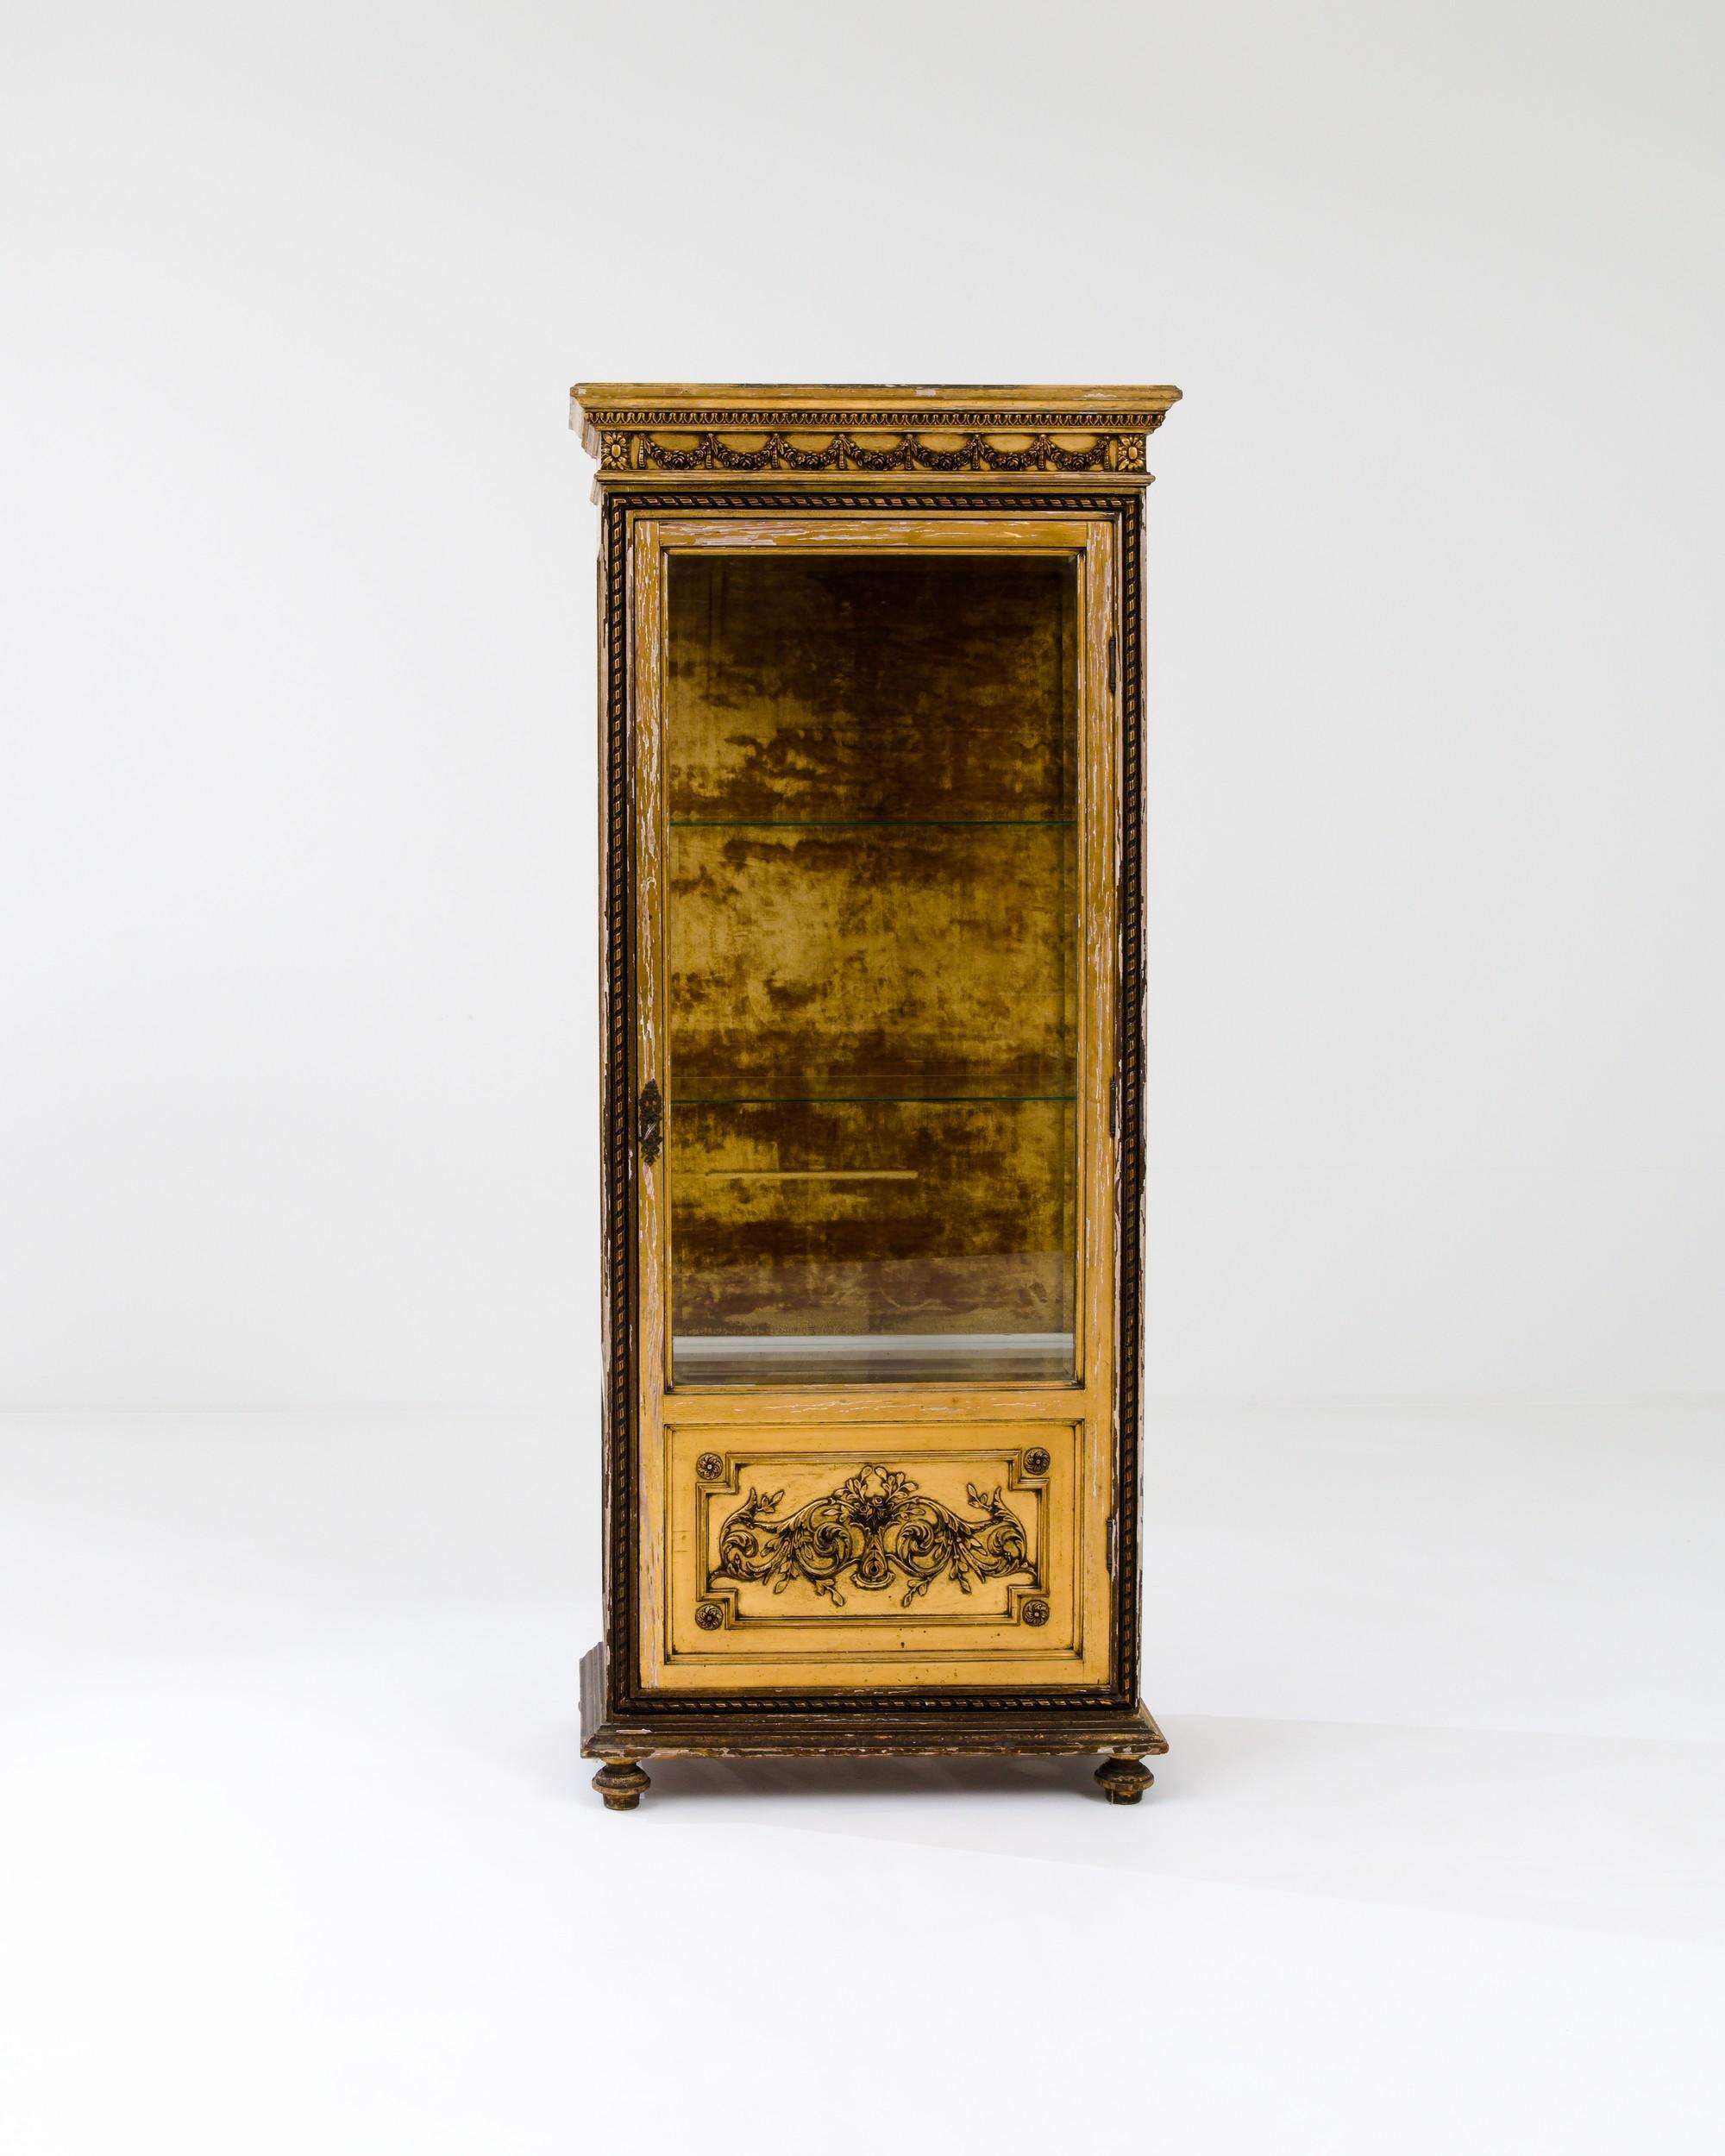 A wooden vitrine created in Spain circa 1900. Glowing with a historical luster, this tall and slender display cabinet dazzles with its time-earned details and painstakingly carved illustrations. Lavishly sculpted details punctuate the top, bottom,